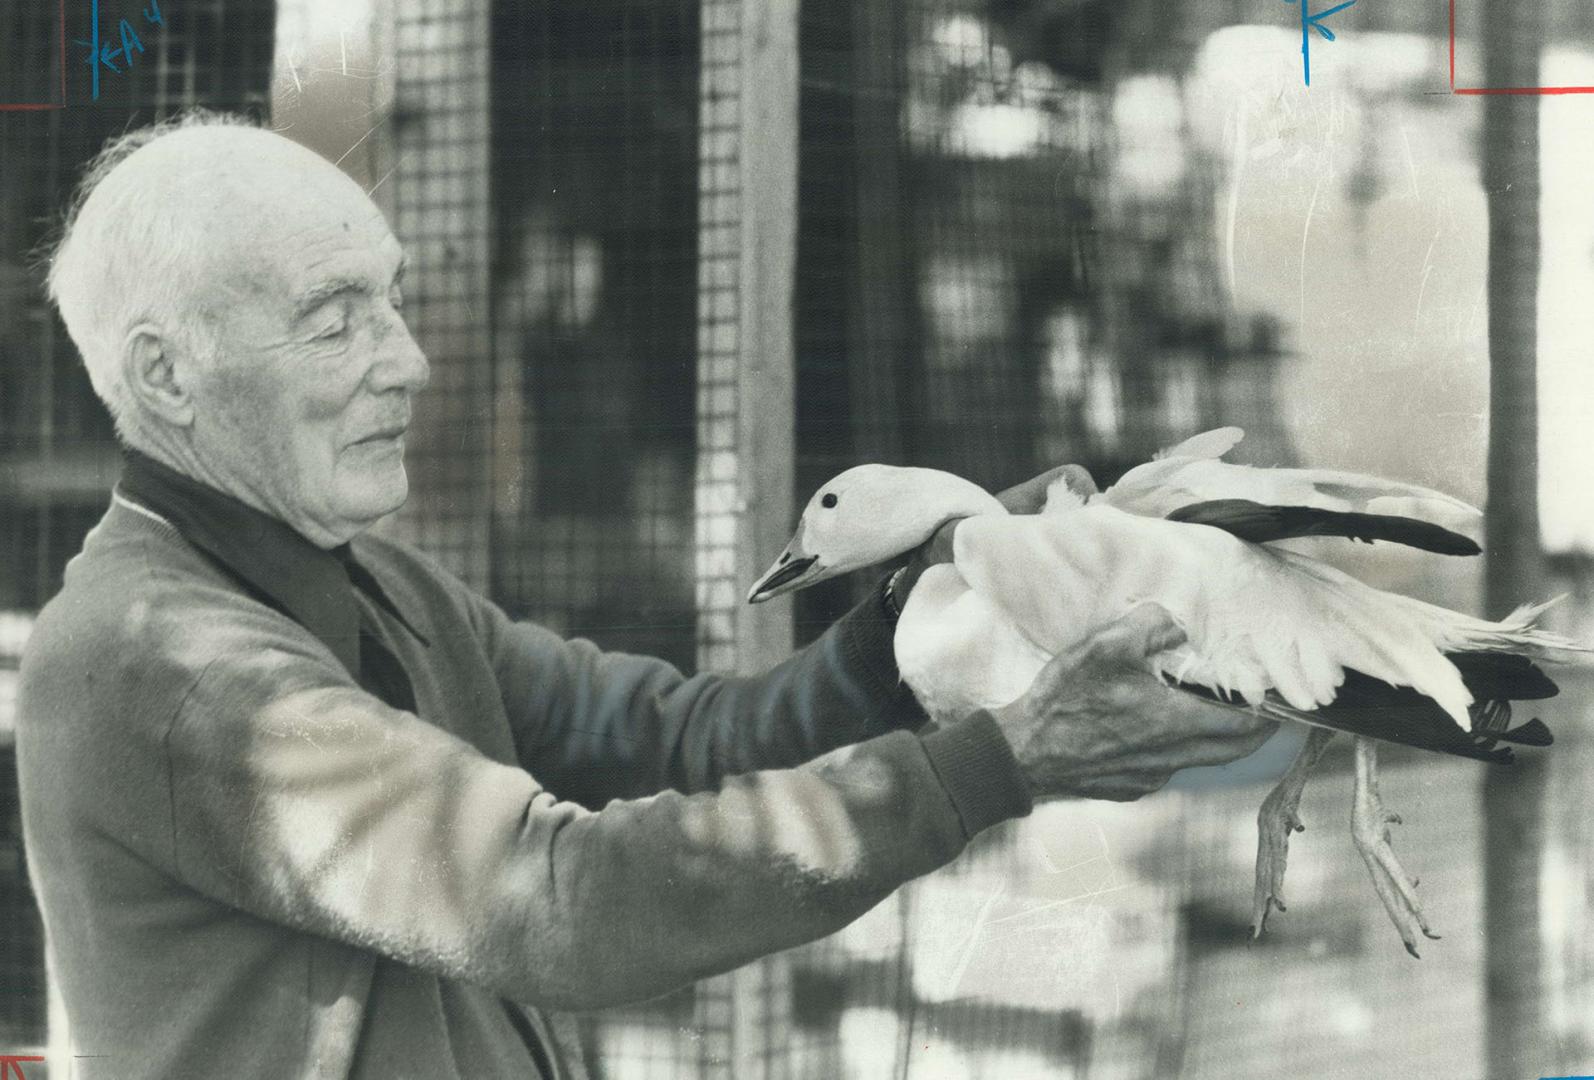 Uncle Frank Dawson tends to one of his injured wildfowl at his 3 3/4-acre conservation area on Elmcrest Rd. The 83-year-old bachelor has been patching up injured birds for as long as anyone can remember. With a small creek running through the back, his property has become a haven for hundreds of waterfowl. He has lived in the same house for over 50 years and has raised a varietyof birds. But Dawson can't recall when people started to bring birds to him, he said.